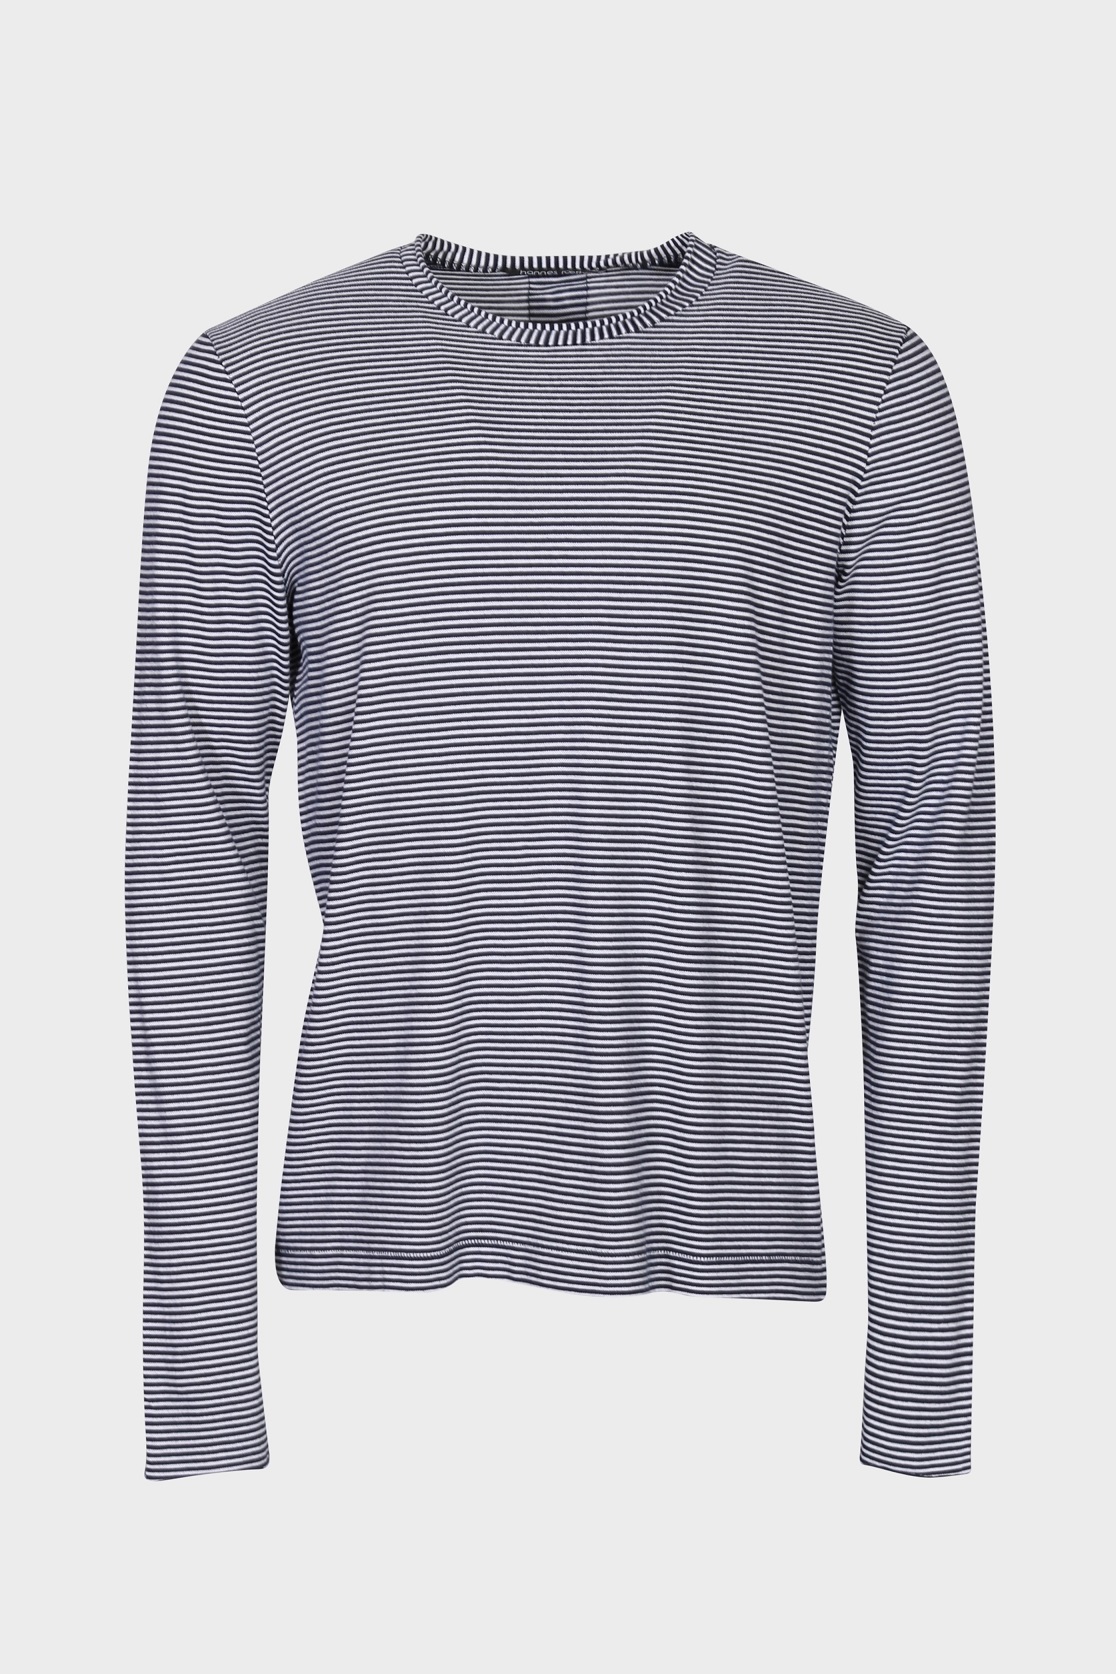 HANNES ROETHER Longsleeve in Navy/White Stripes